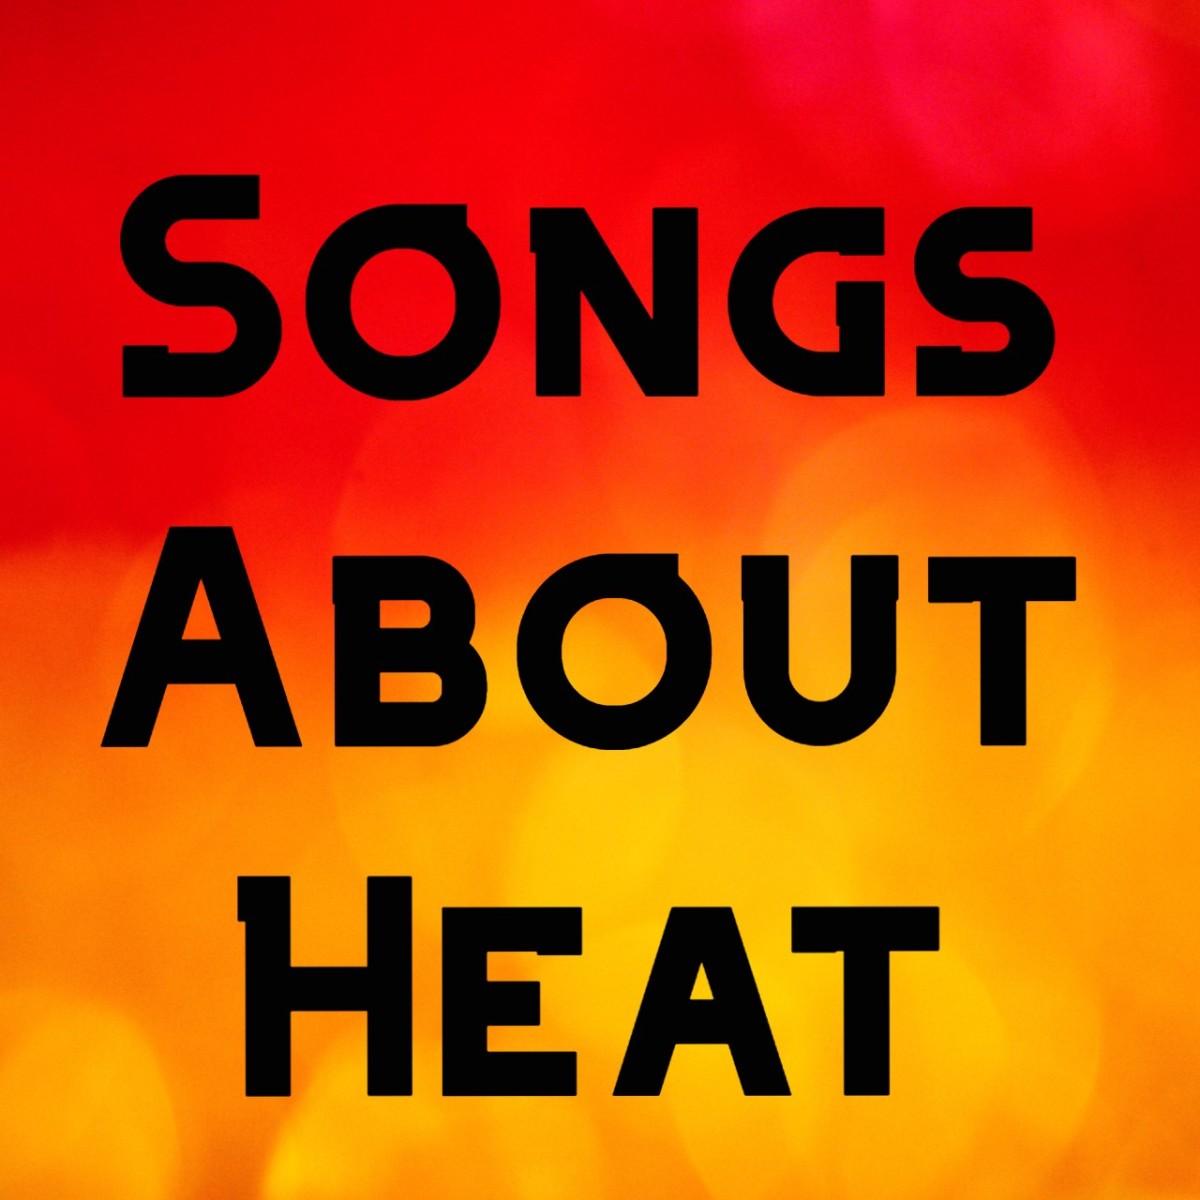 54 Songs About Heat